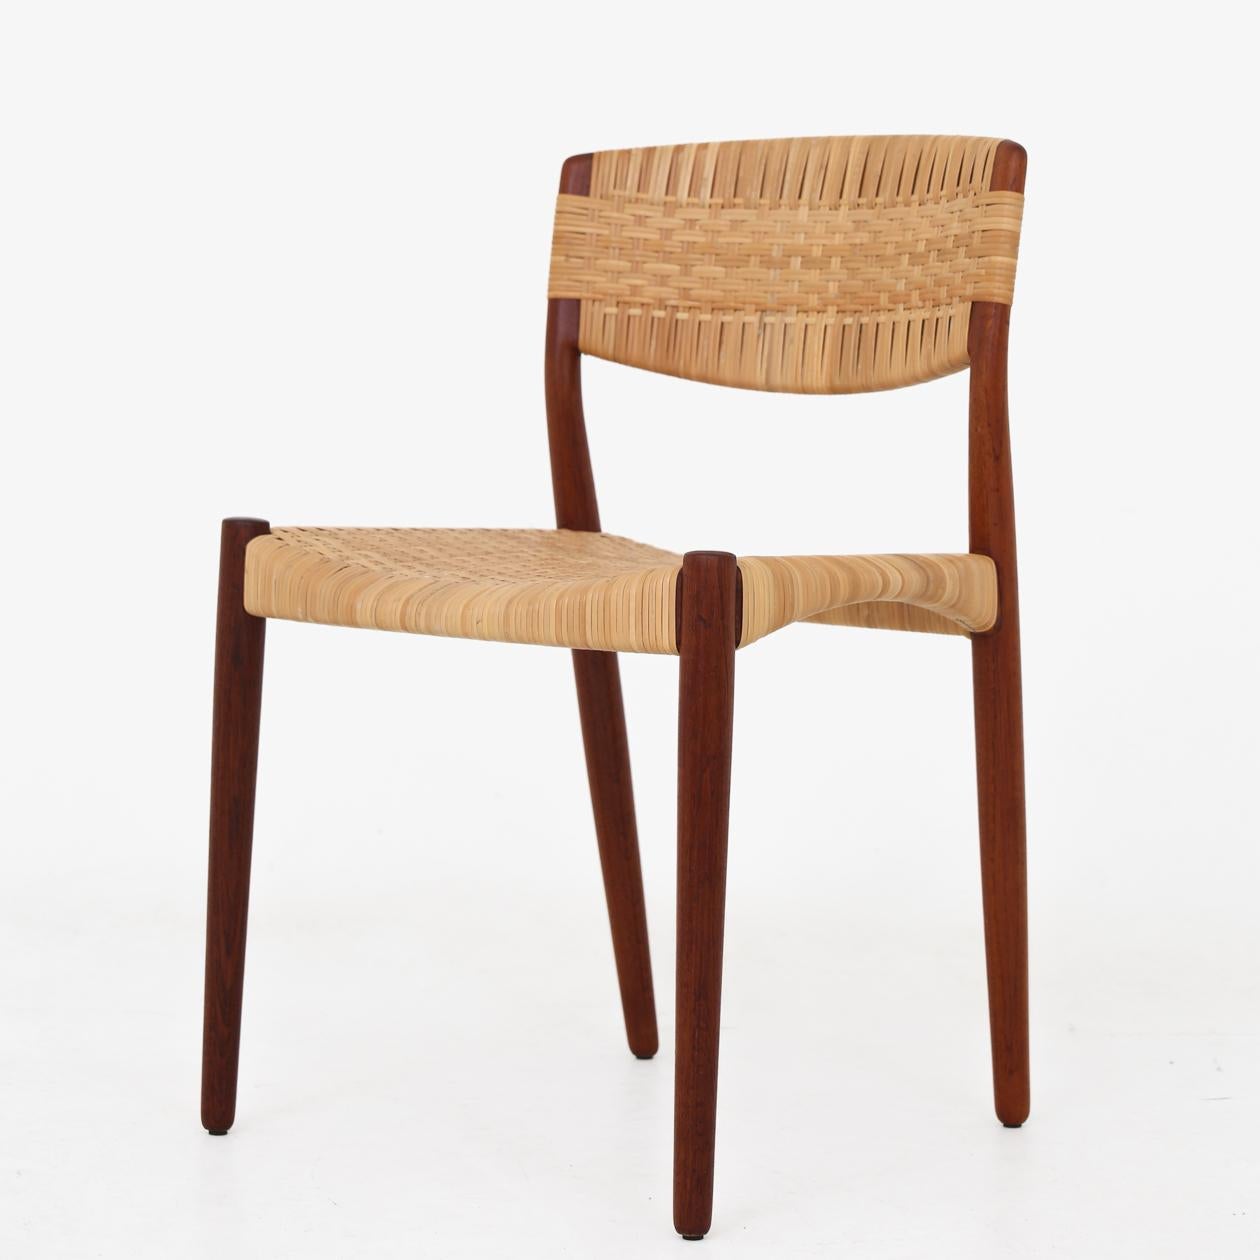 Set of four dining chairs in teak with patinated cane, 1950s. Ejner Larsen & Aksel Bender Madsen / Willy Beck.